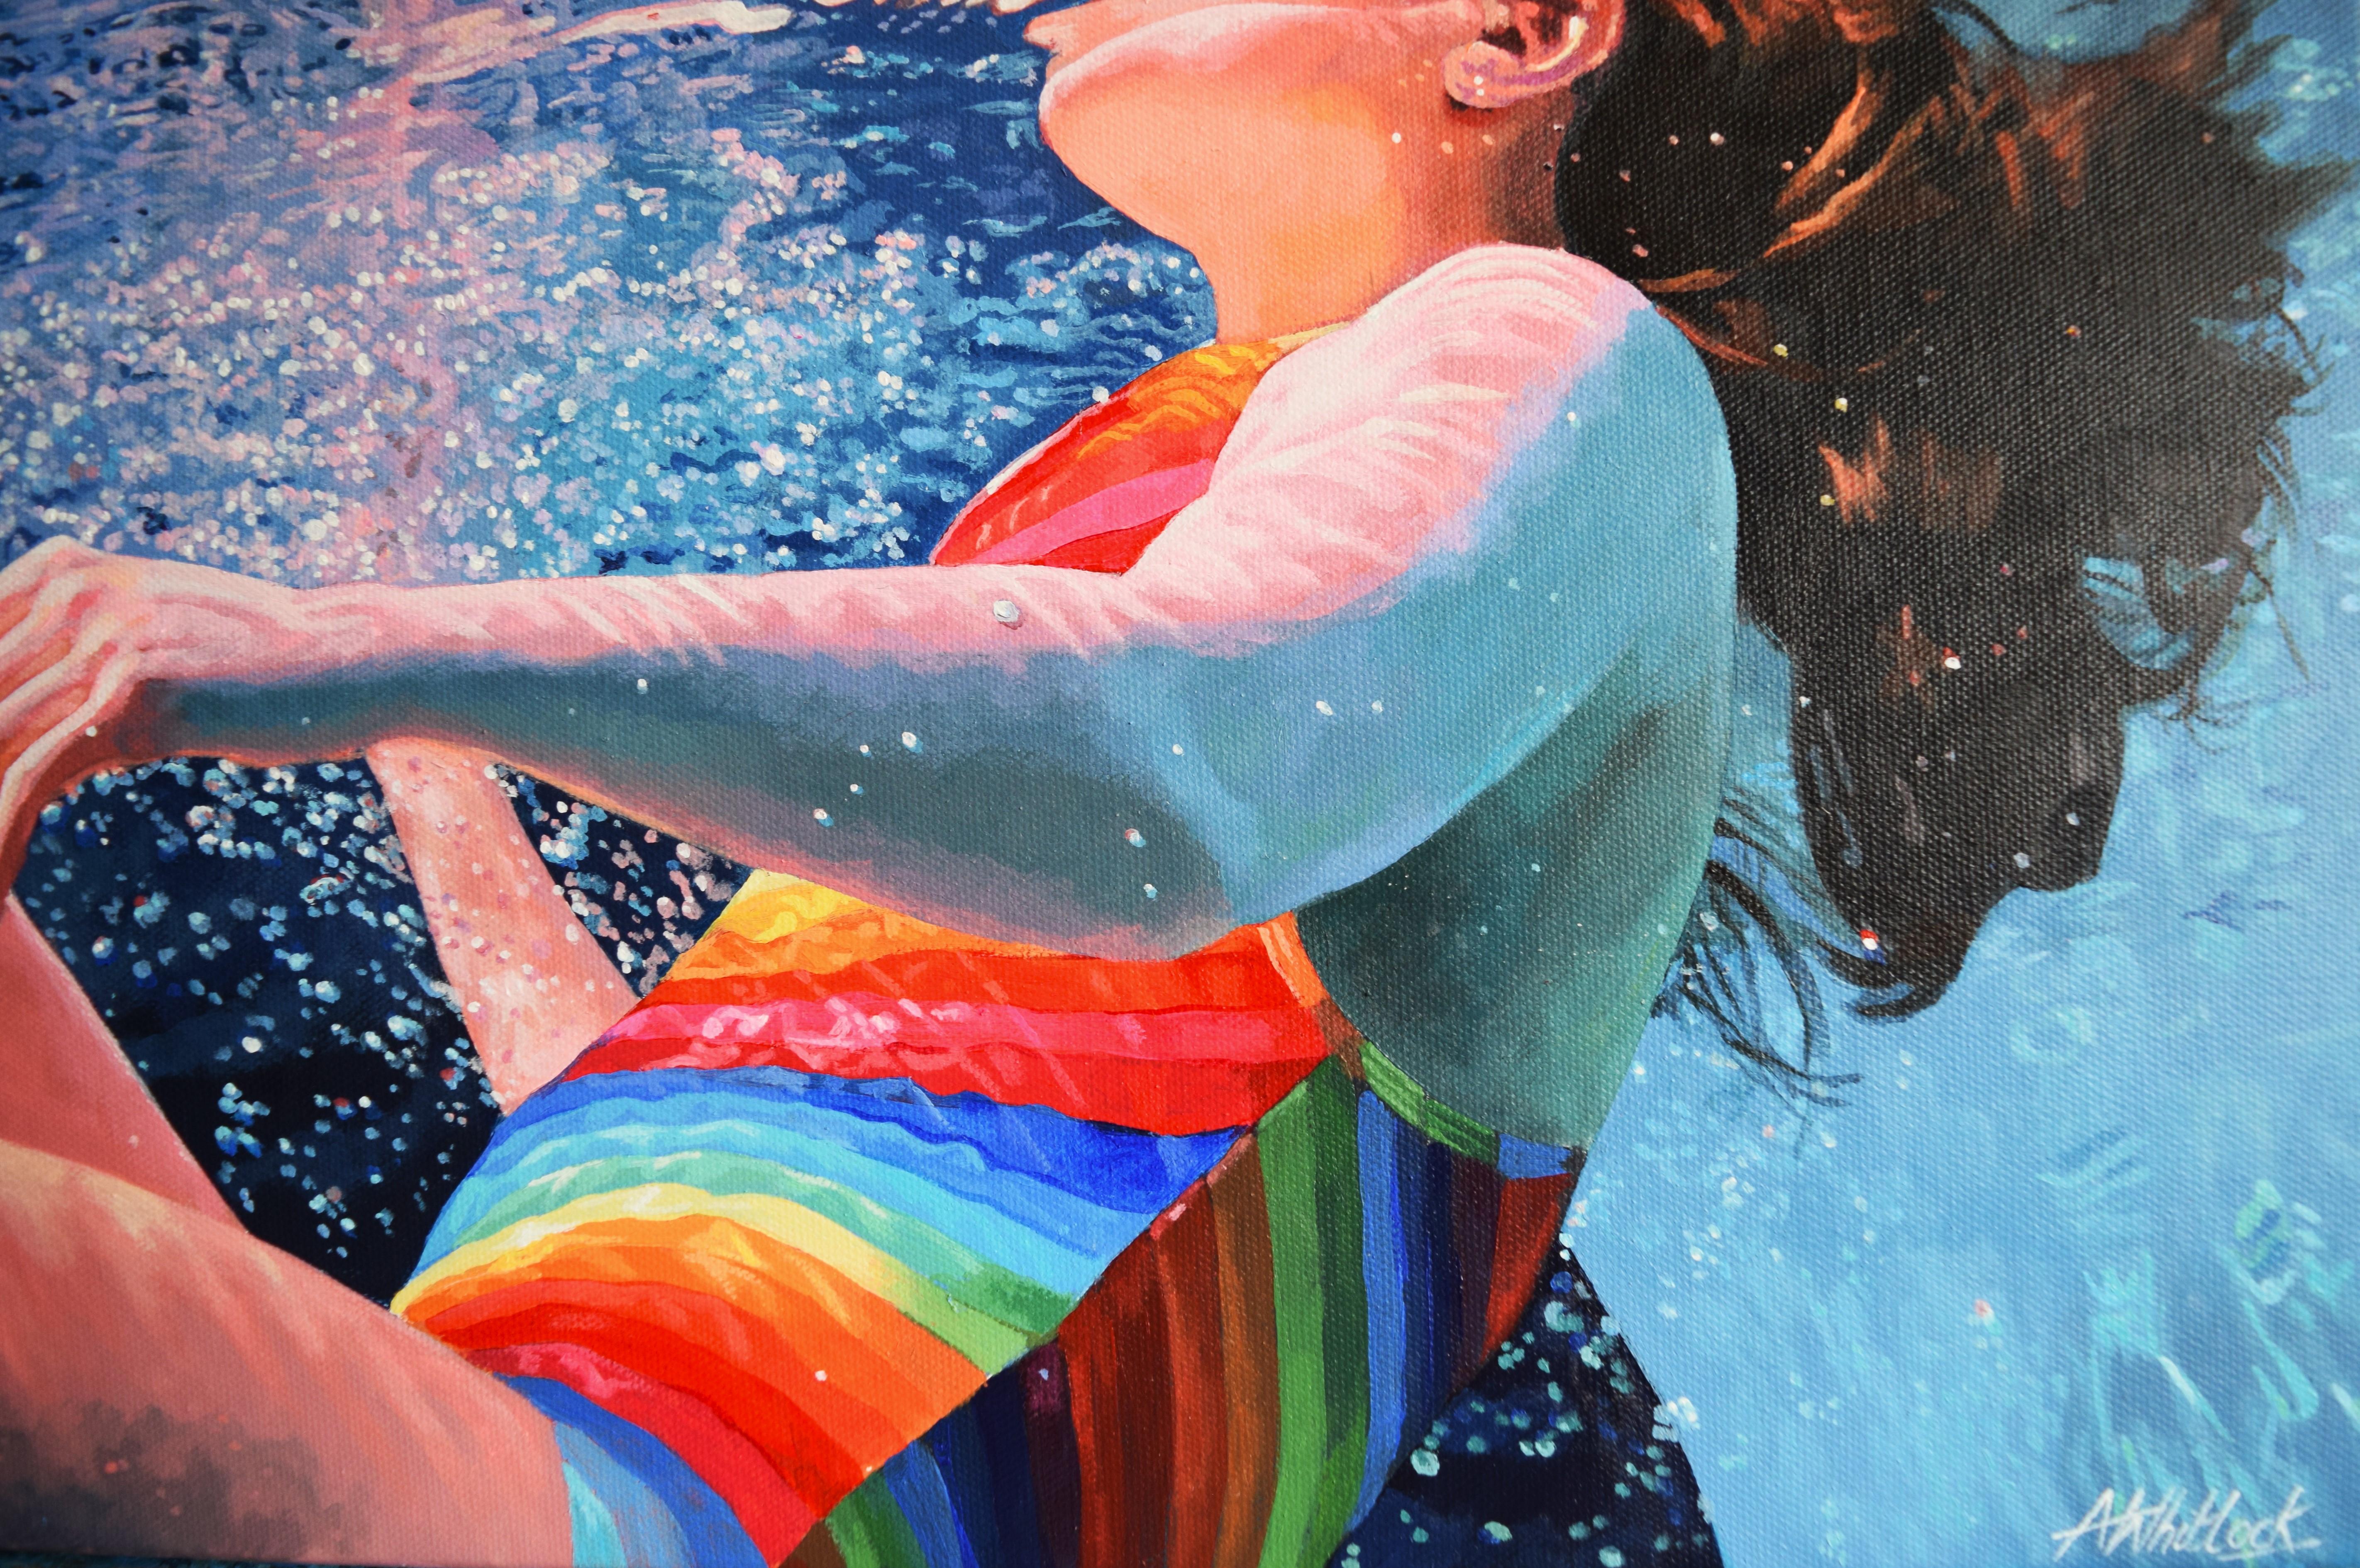 Origin-original hyperrealistic figurative waterscape painting-contemporary art  - Impressionist Painting by Abi Whitlock